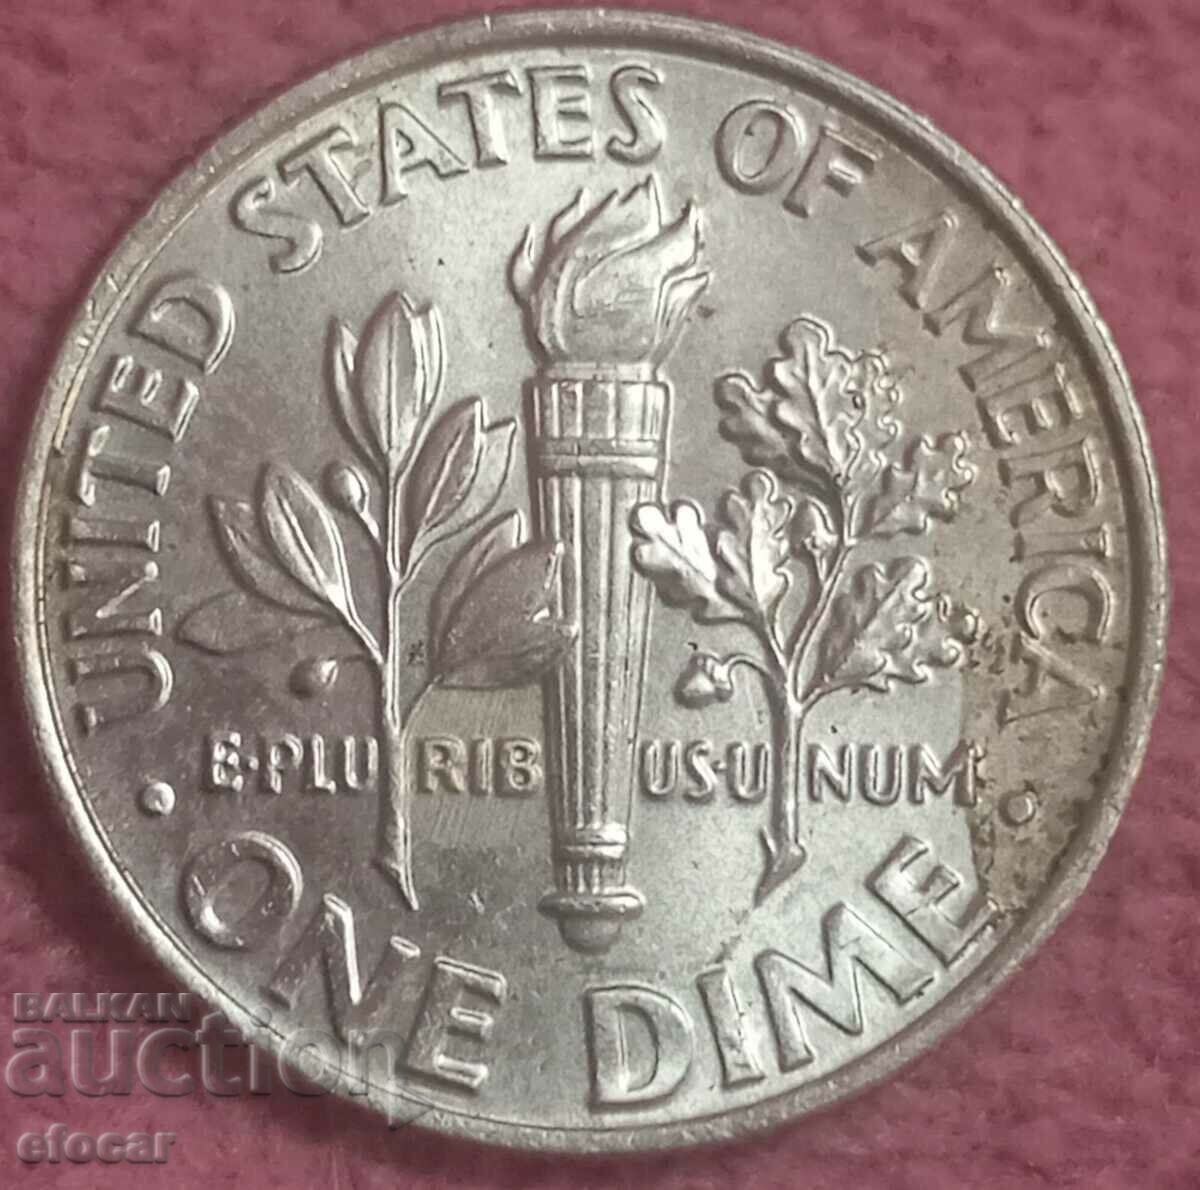 10 cents USA 2019 letter R